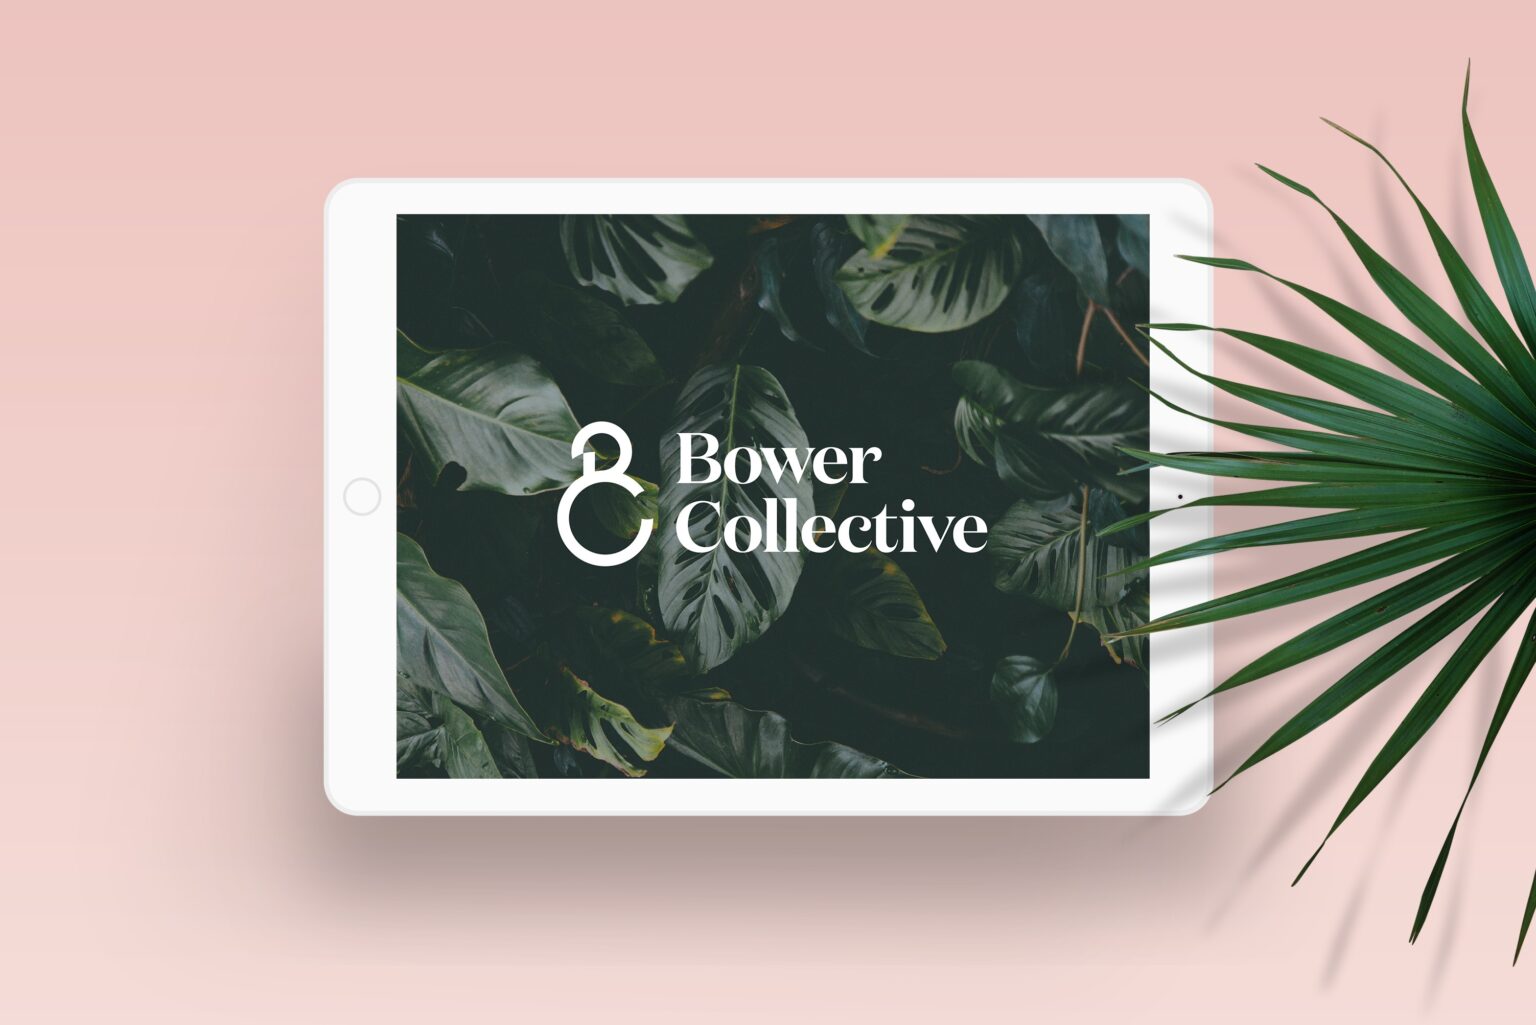 Bower Collective Referral Code